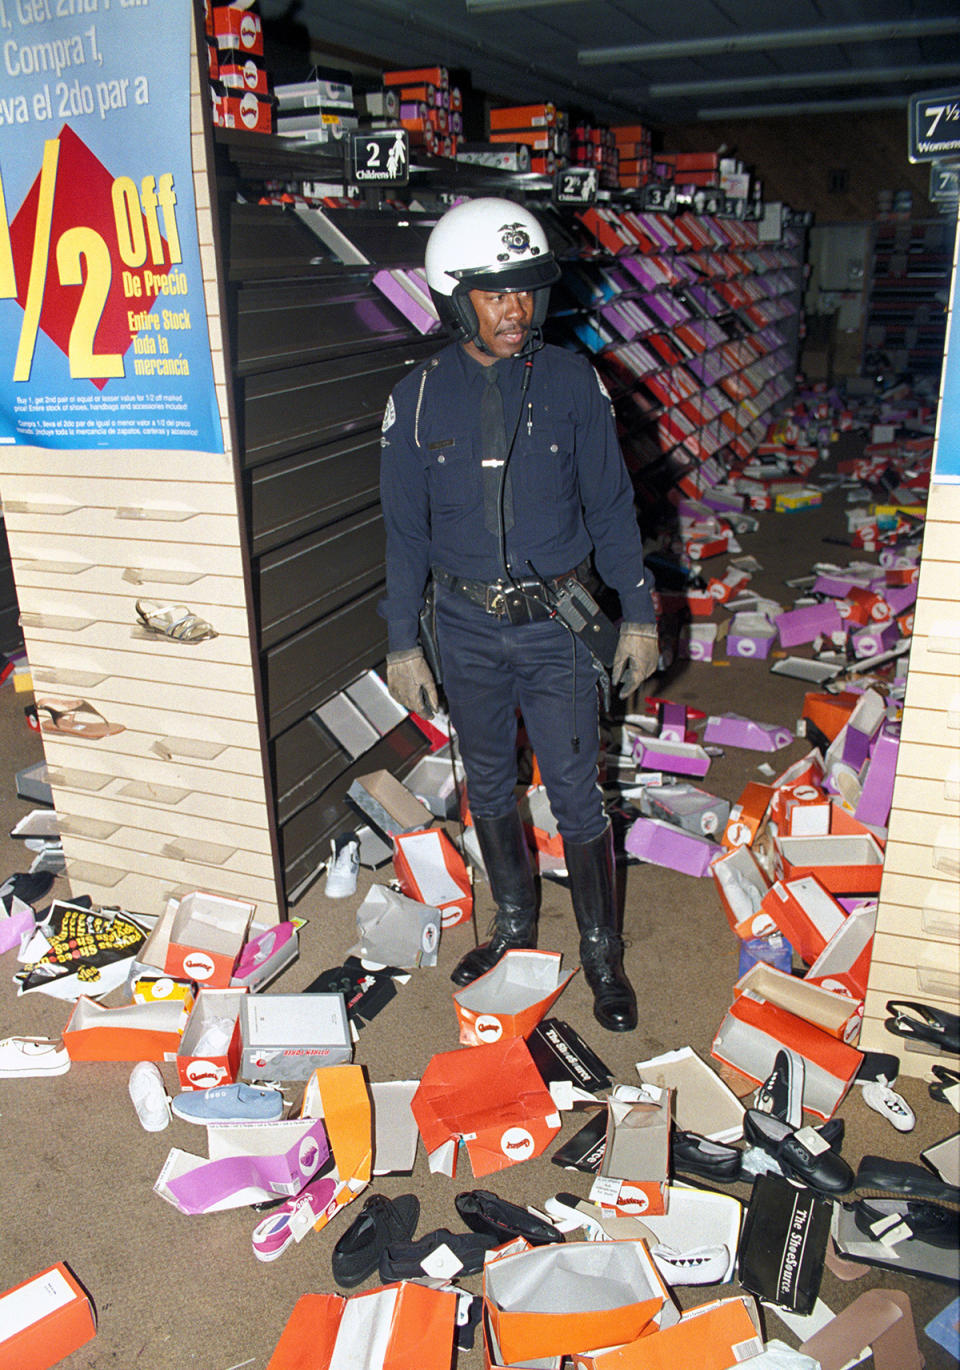 Police officer stands in aisle of looted store